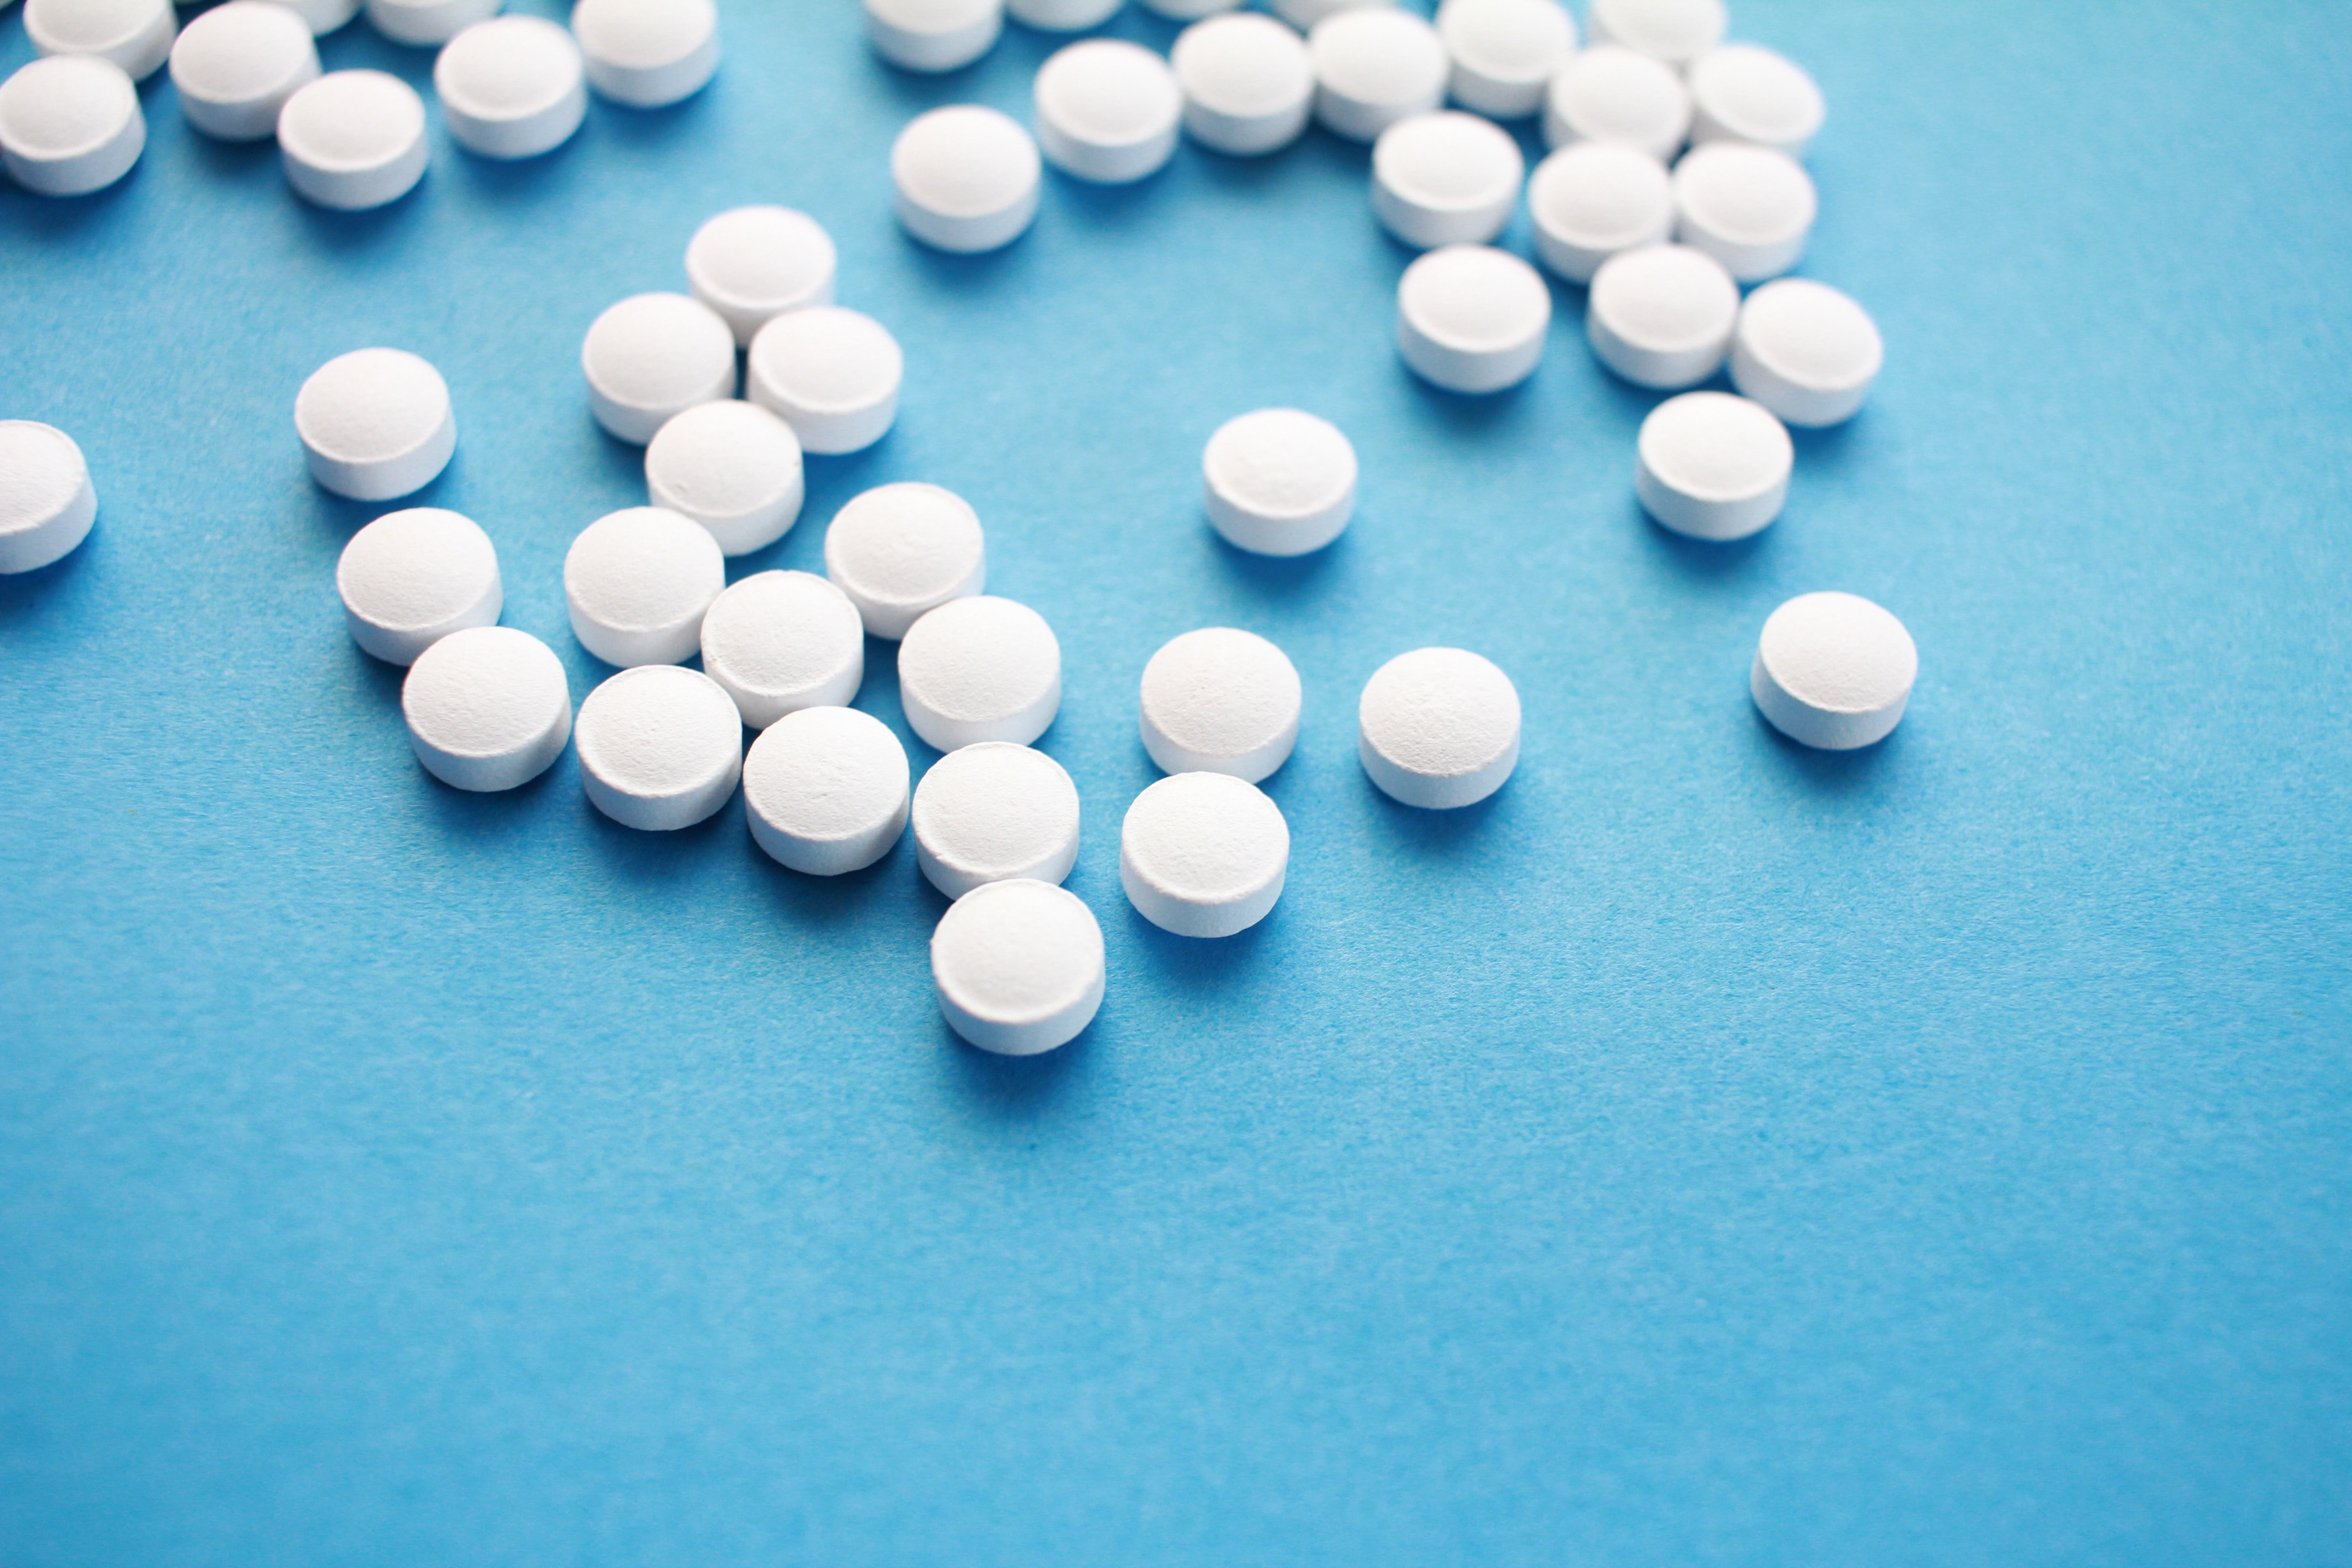 Photograph of white pharmaceutical pills on a blue background.